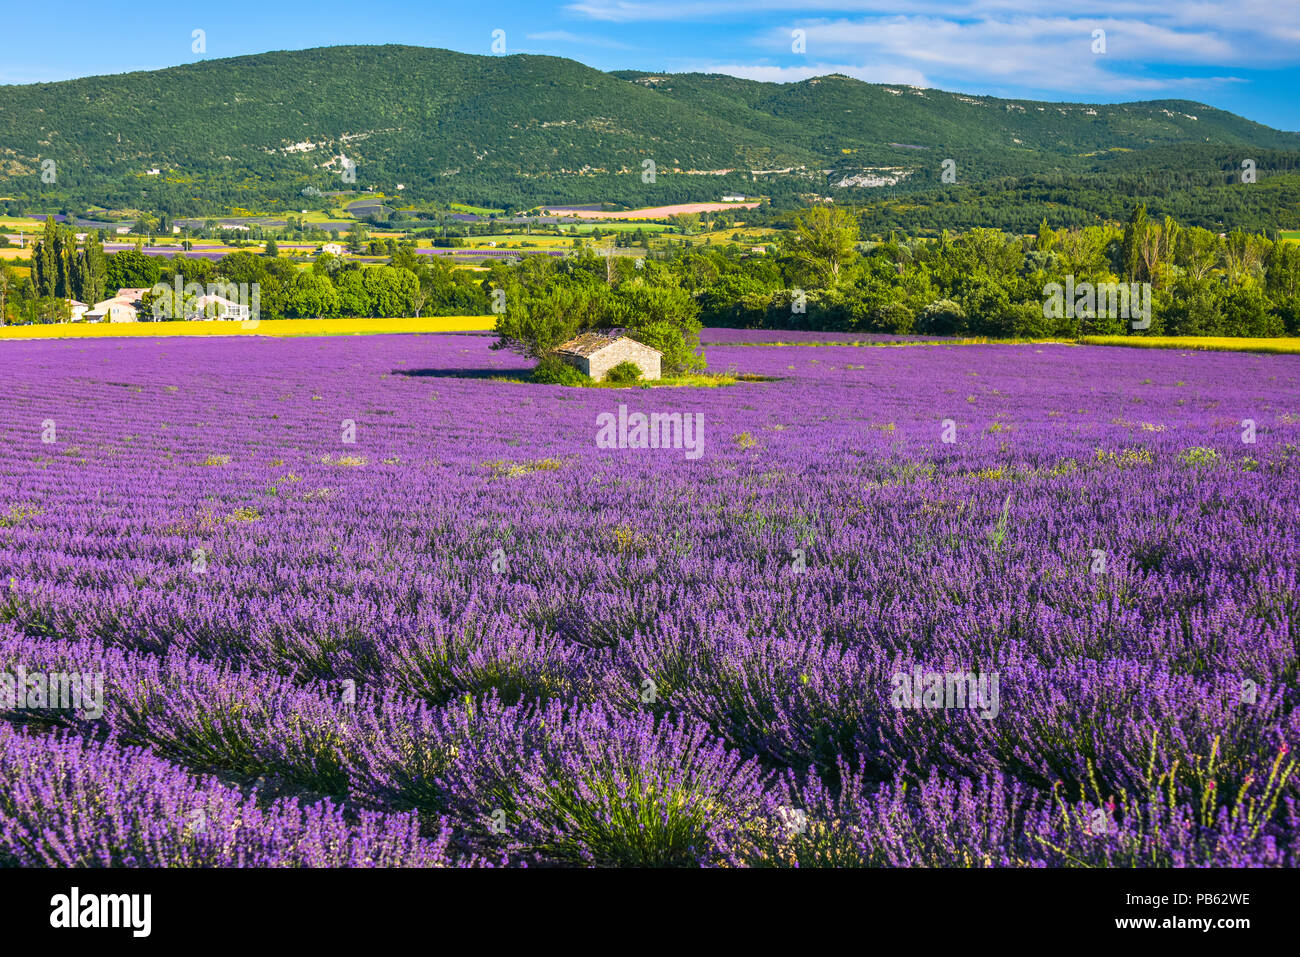 landscape panorama with large lavender field and stone hut, Provence, France, near Sault, department Vaucluse, region Provence-Alpes-Côte d'Azur Stock Photo